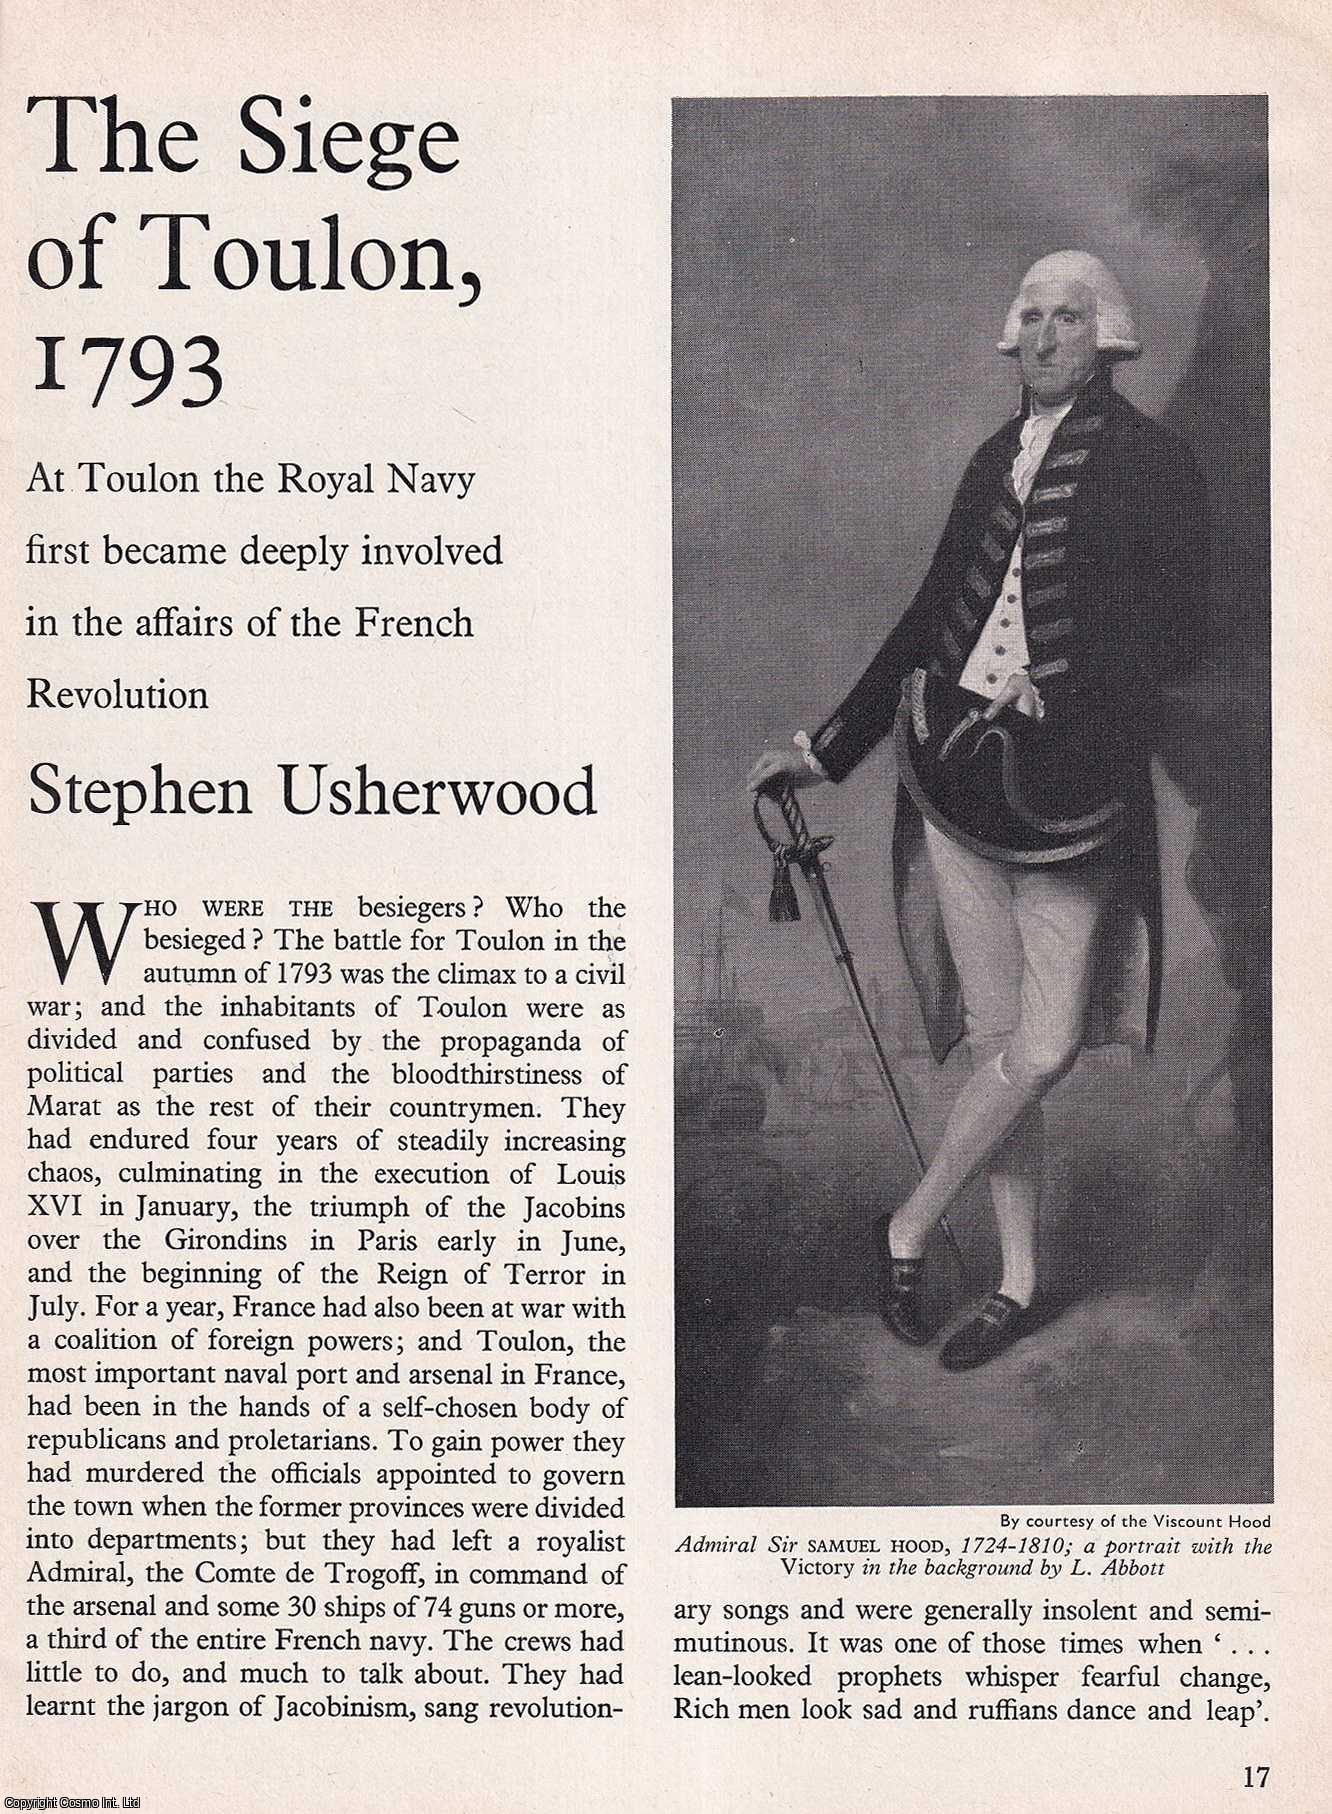 Stephen Usherwood - The Siege of Toulon, 1793. An original article from History Today magazine, 1972.